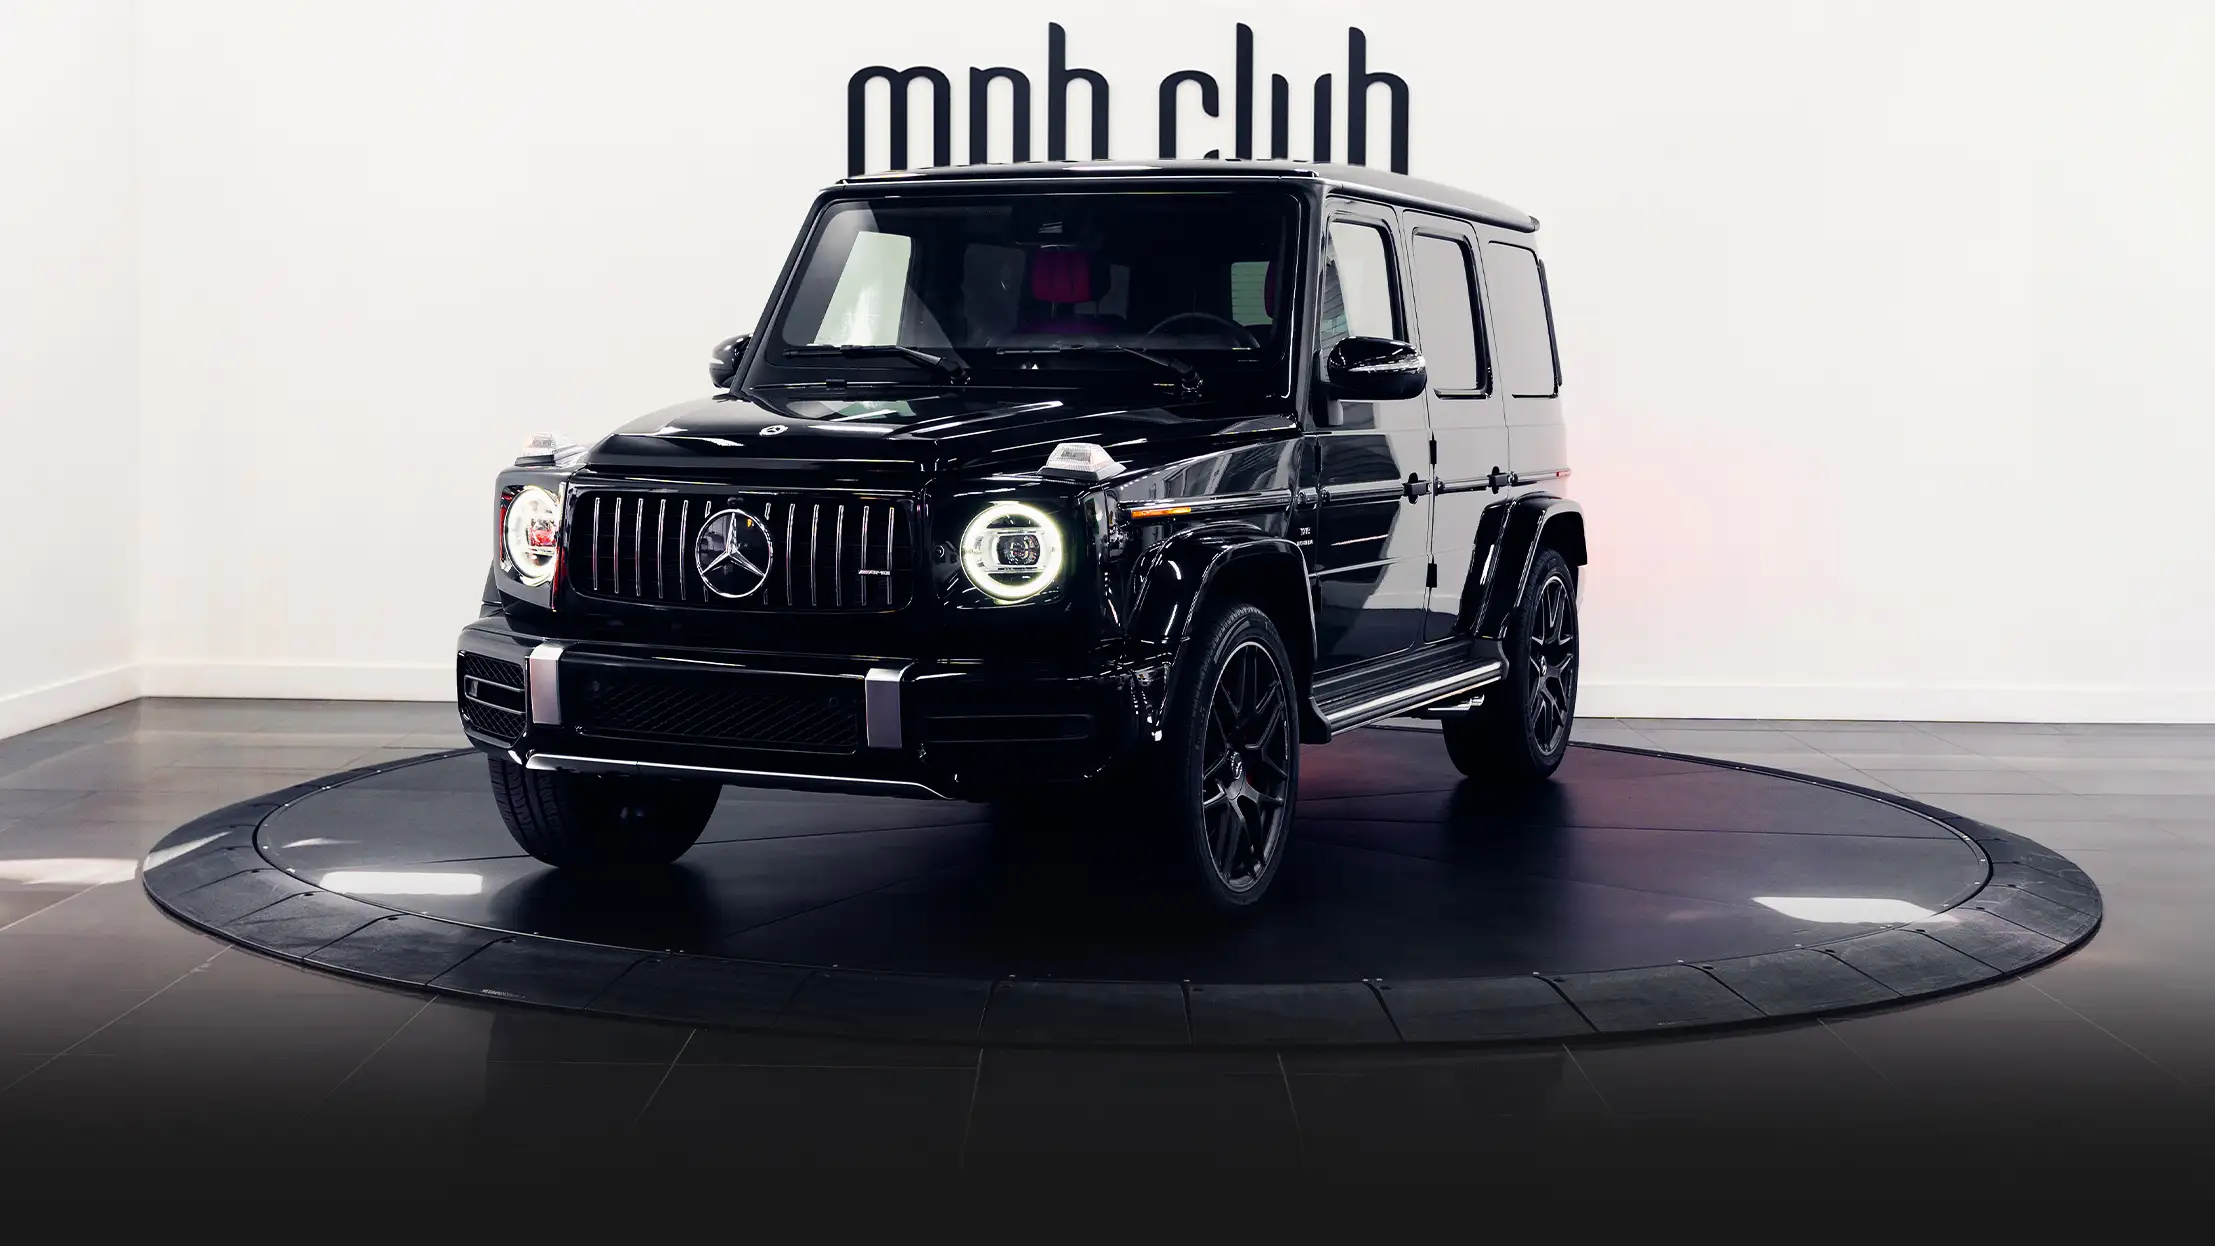 Black with red Mercedes Benz G63 AMG G Wagon rental profile view - mph club